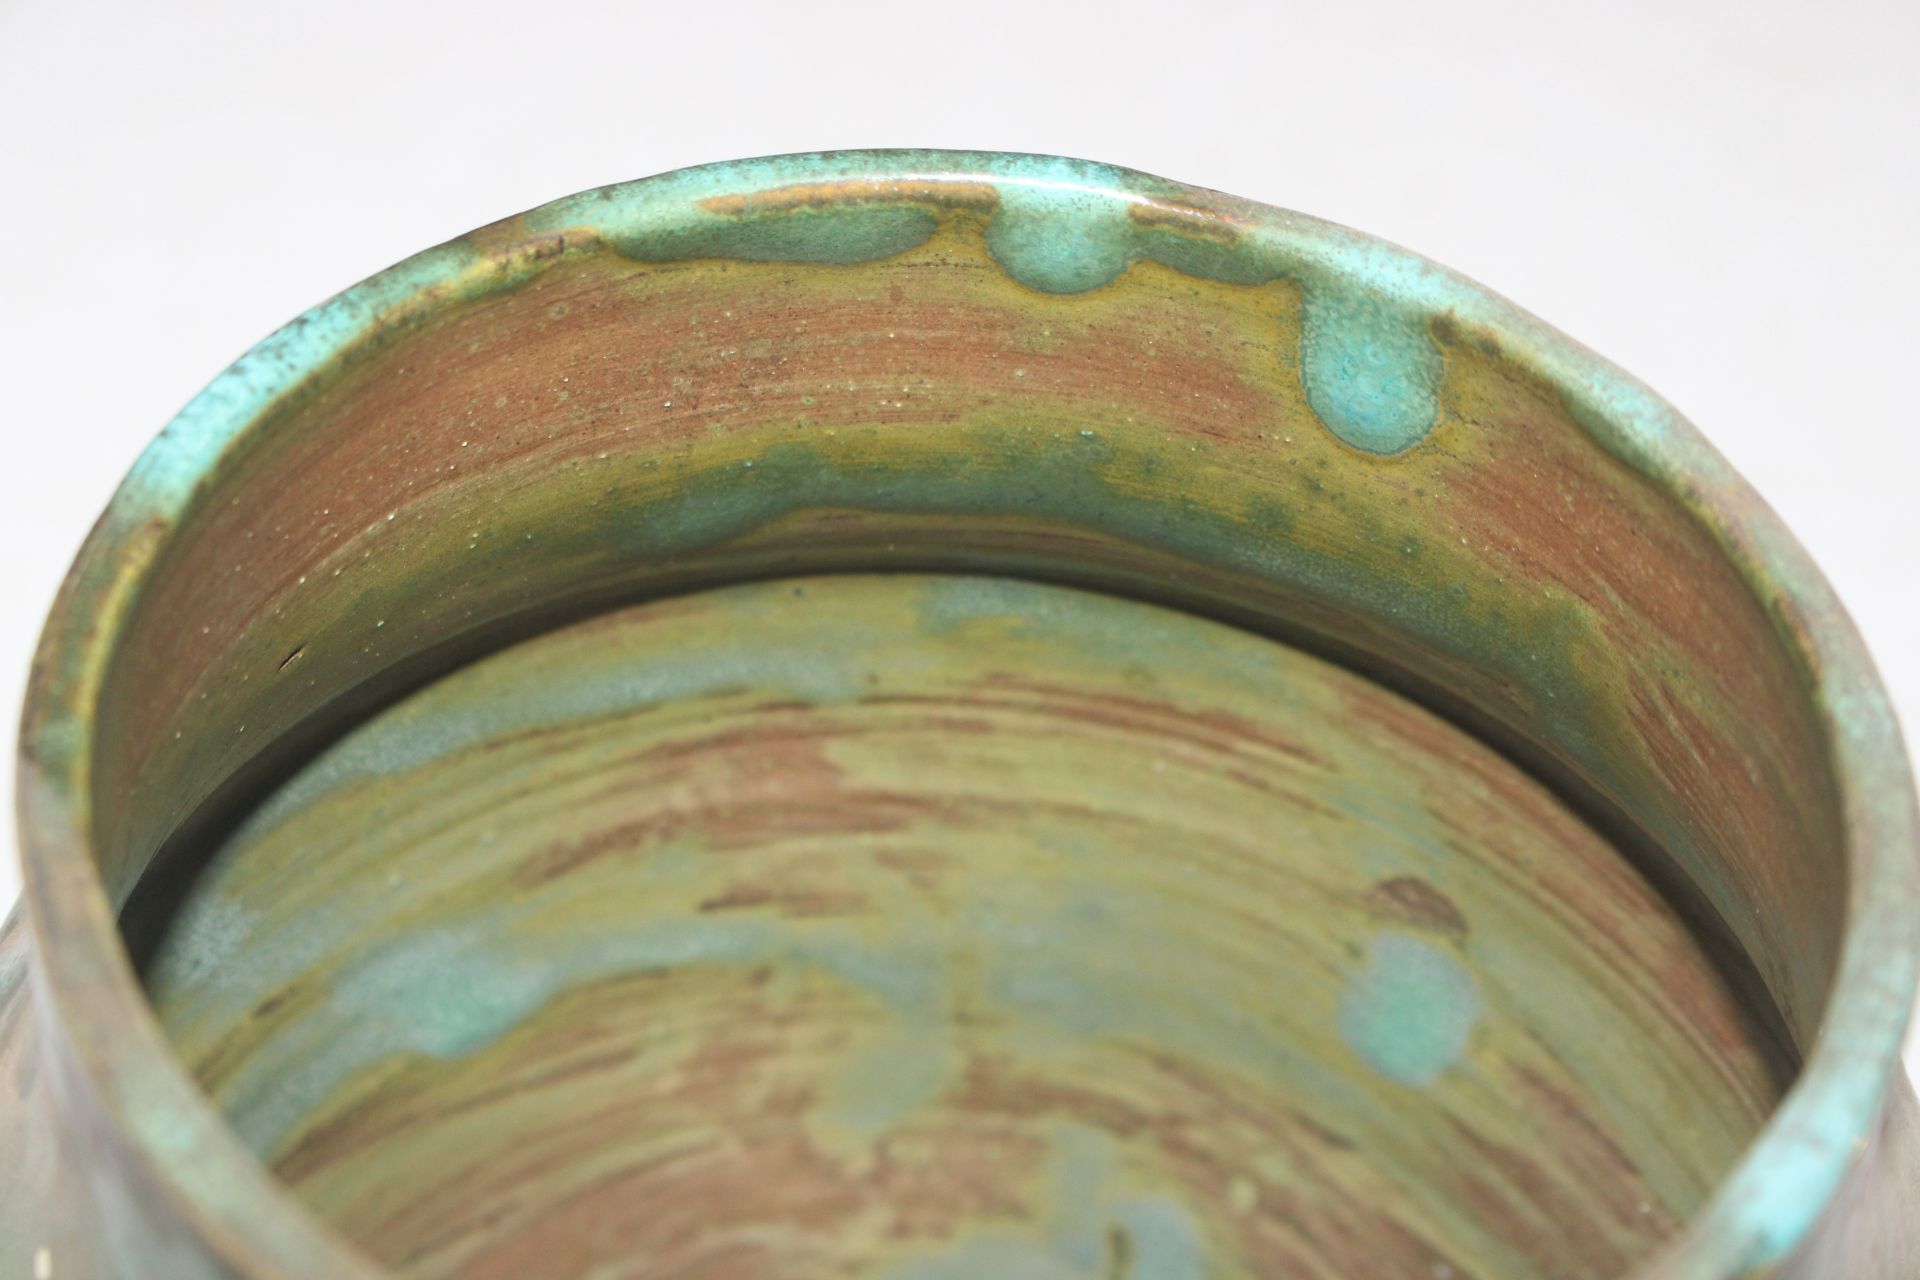 A Rye pottery vase with green and brown mottled gl - Image 3 of 4